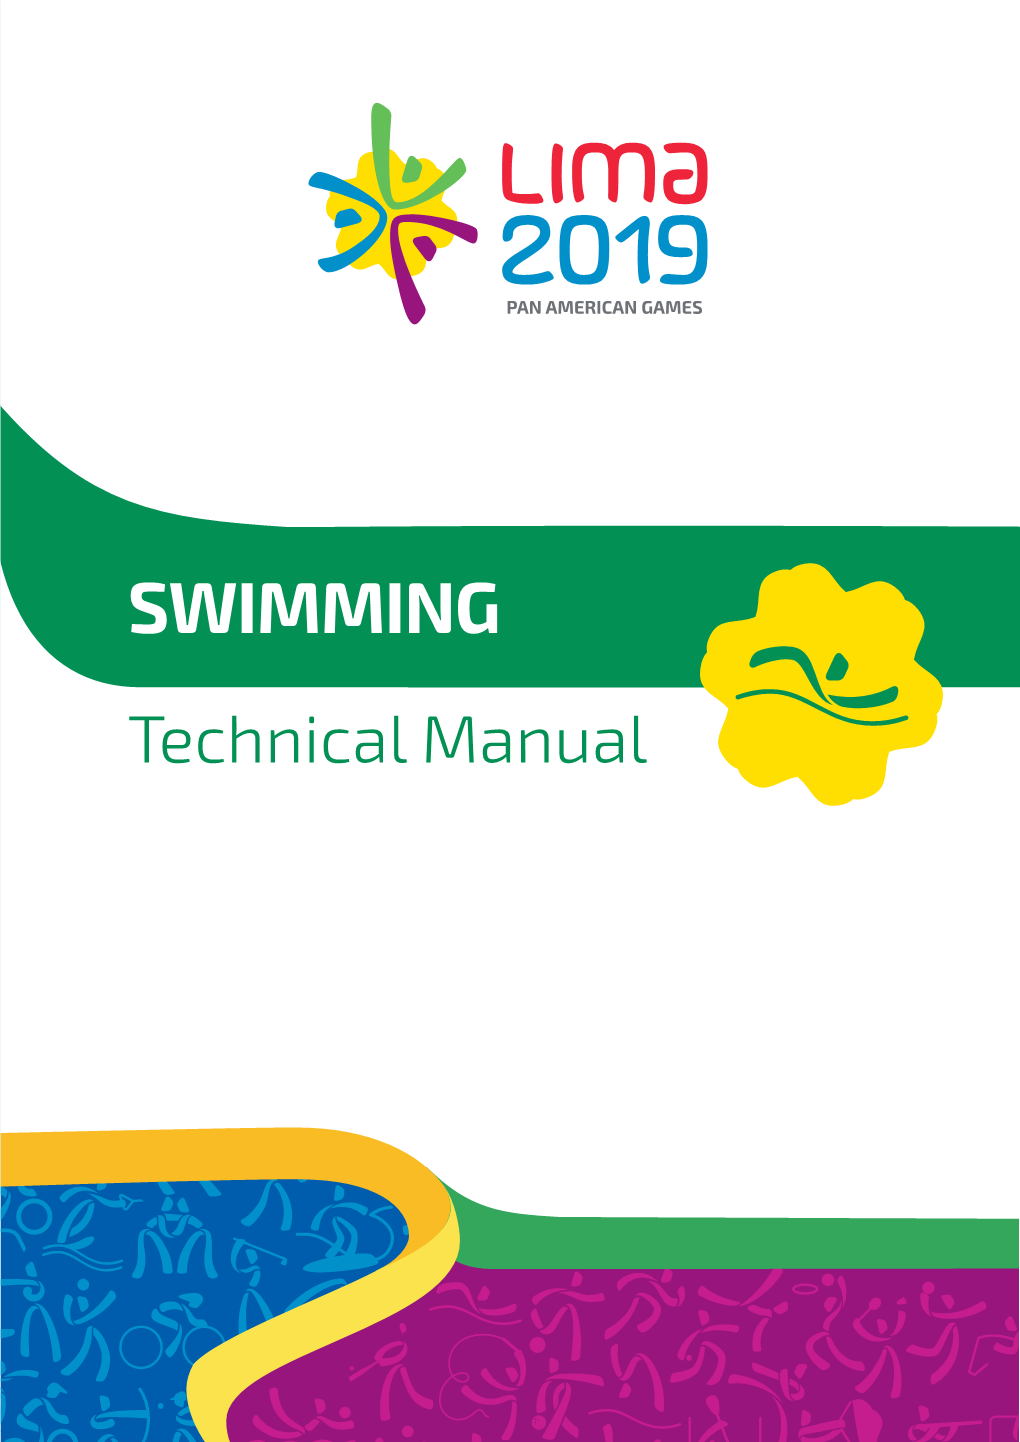 SWIMMING Technical Manual Introduction